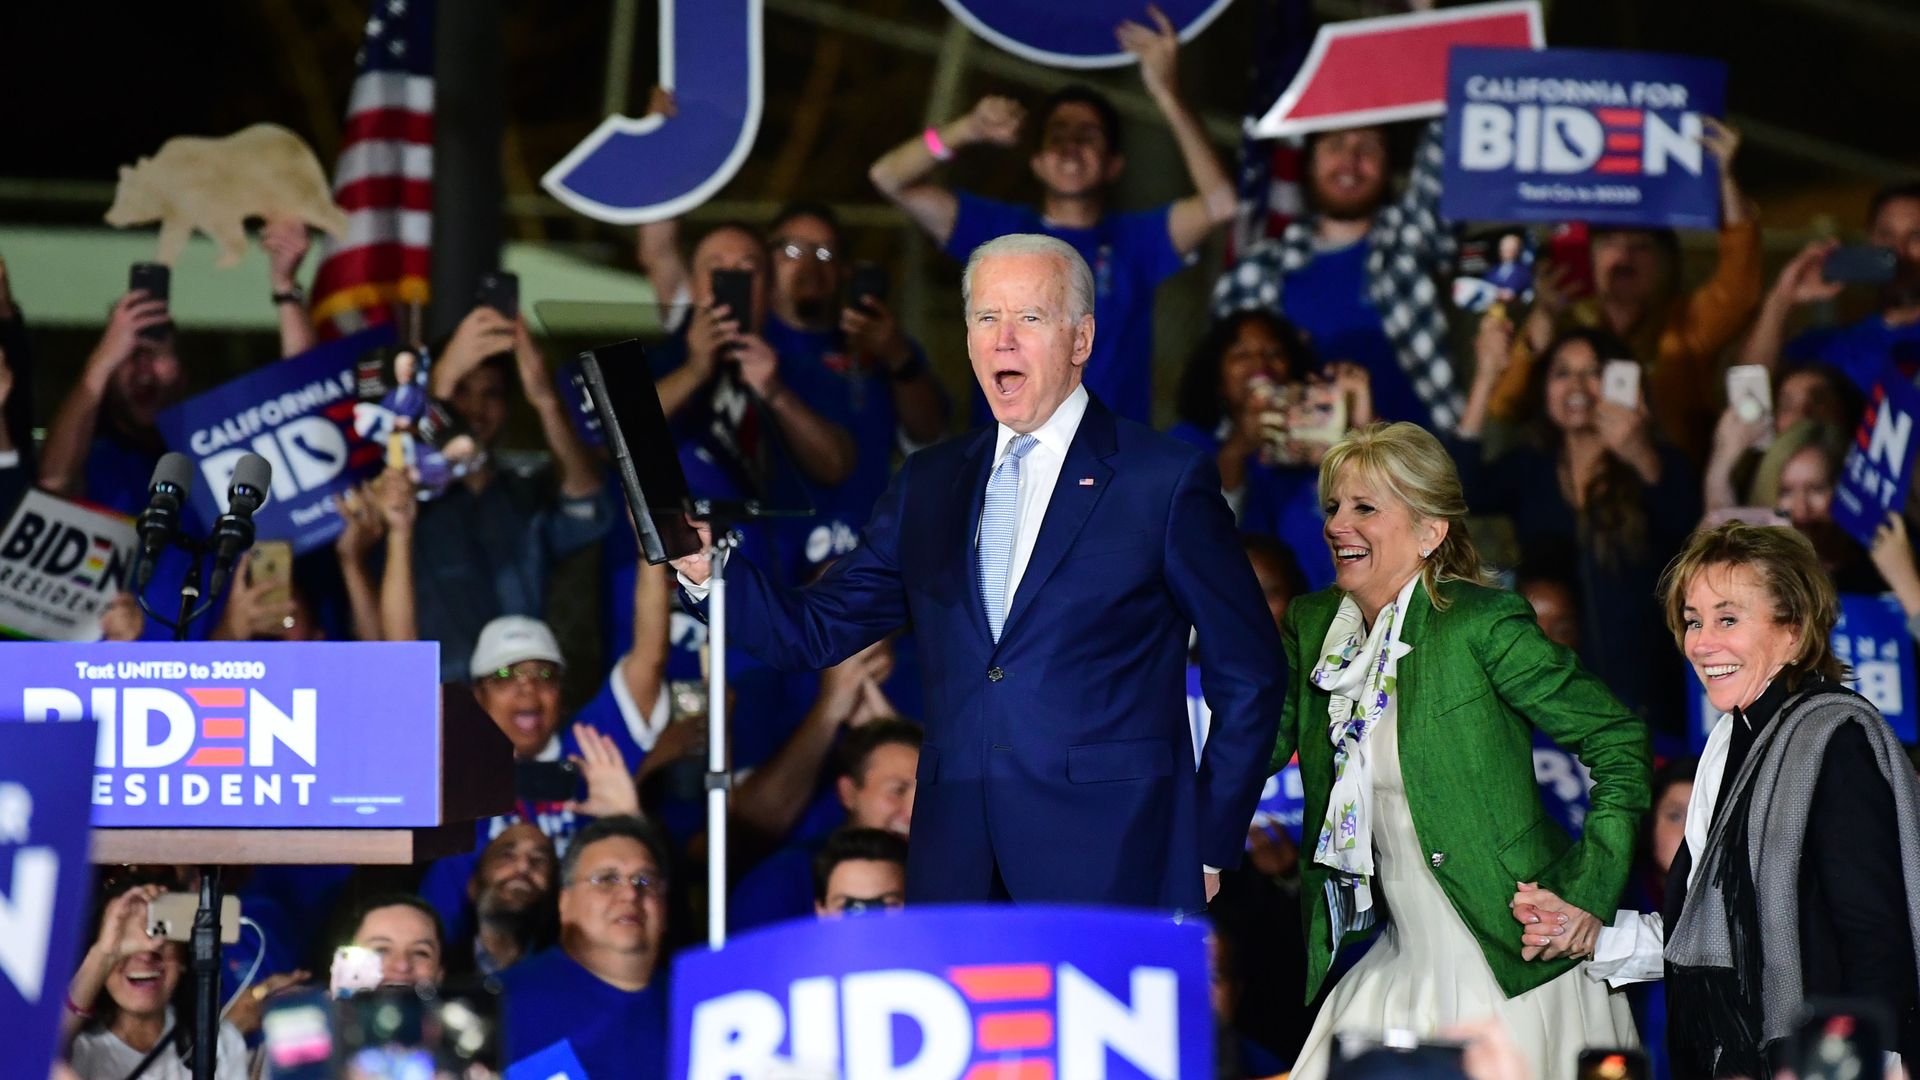 Democratic presidential hopeful former Vice President Joe Biden (L) arrives onstage with his wife Jill and sister Valerie (R) for a Super Tuesday event in Los Angeles on March 3, 2020